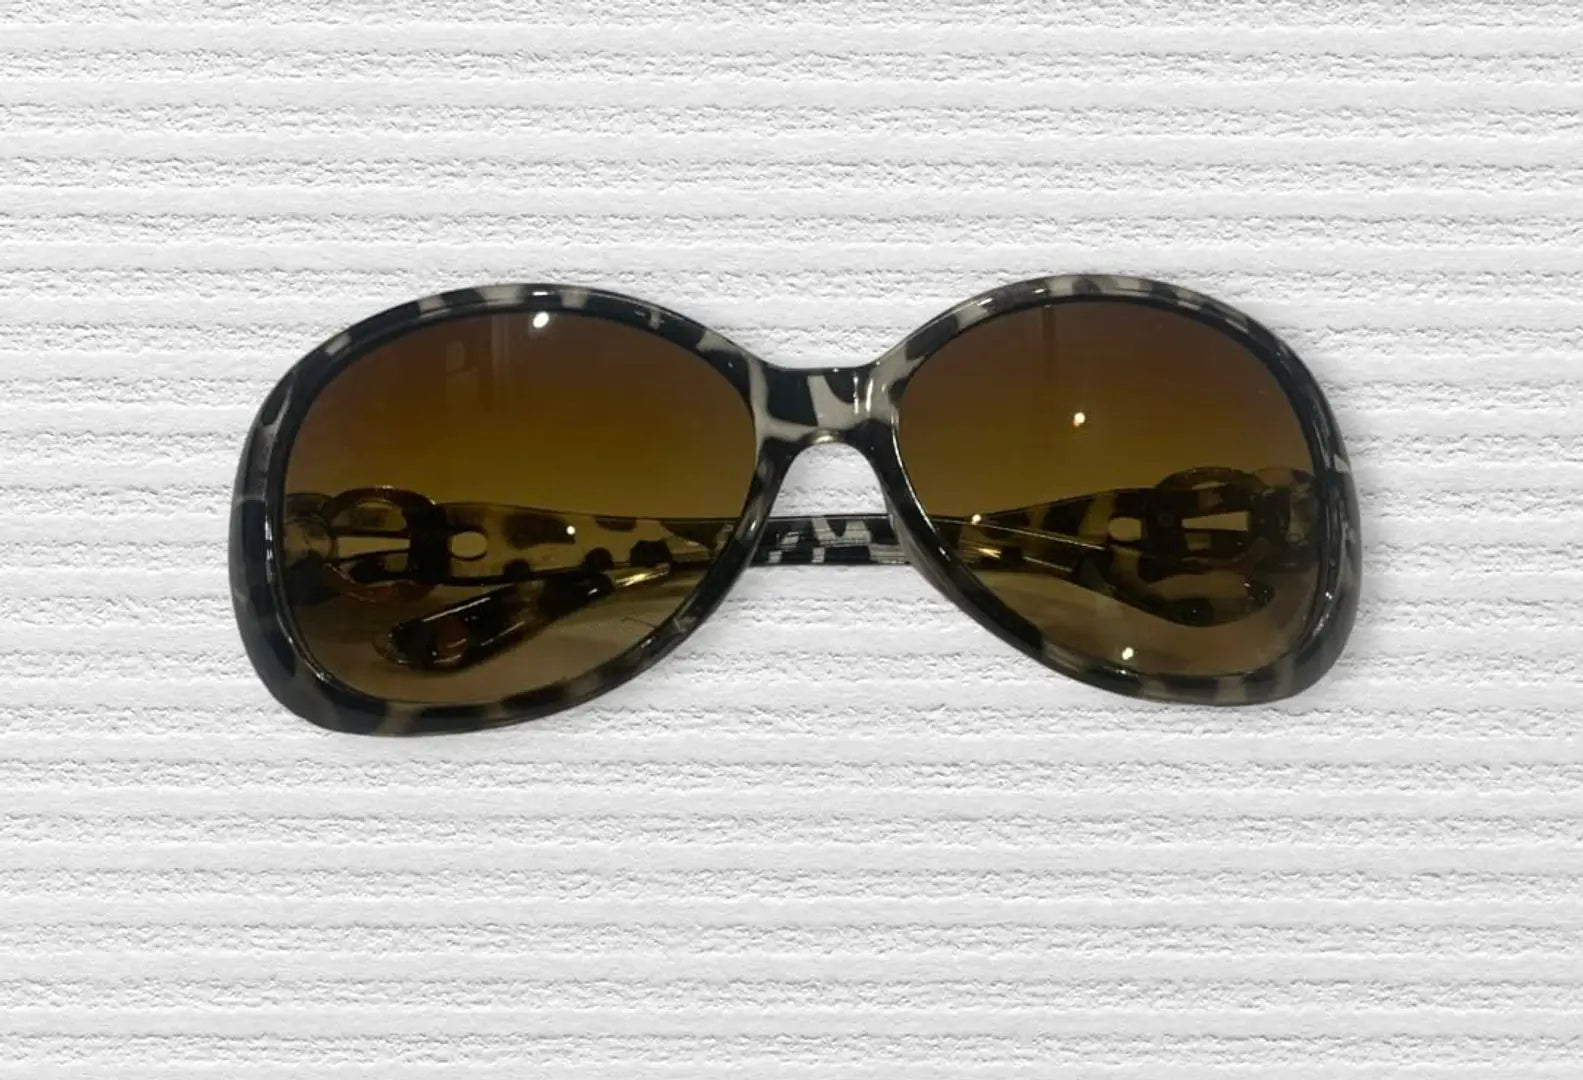 Stylish Women Sunlgass |UV Protected Sunglasses |Large Size | Six Different Shades Available